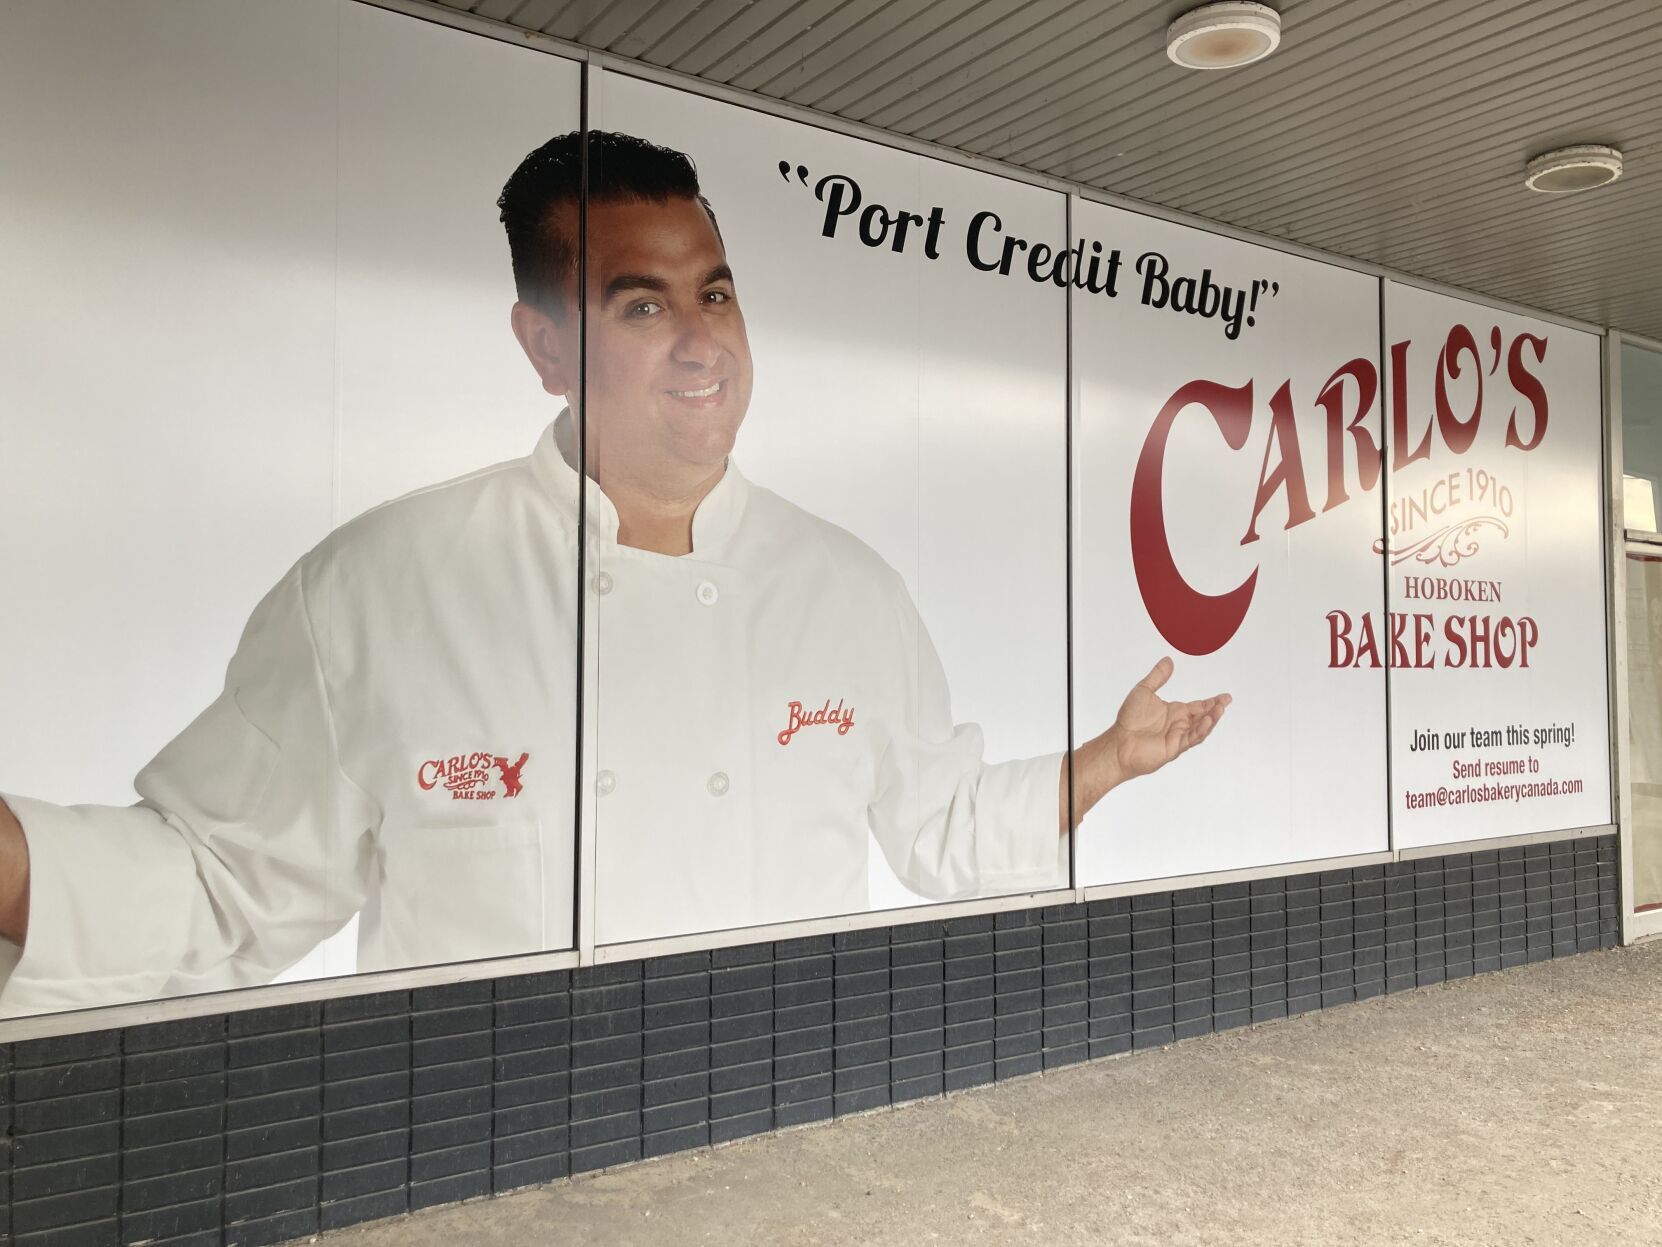 A sweet new Bethlehem business for the 'Cake Boss' – The Morning Call